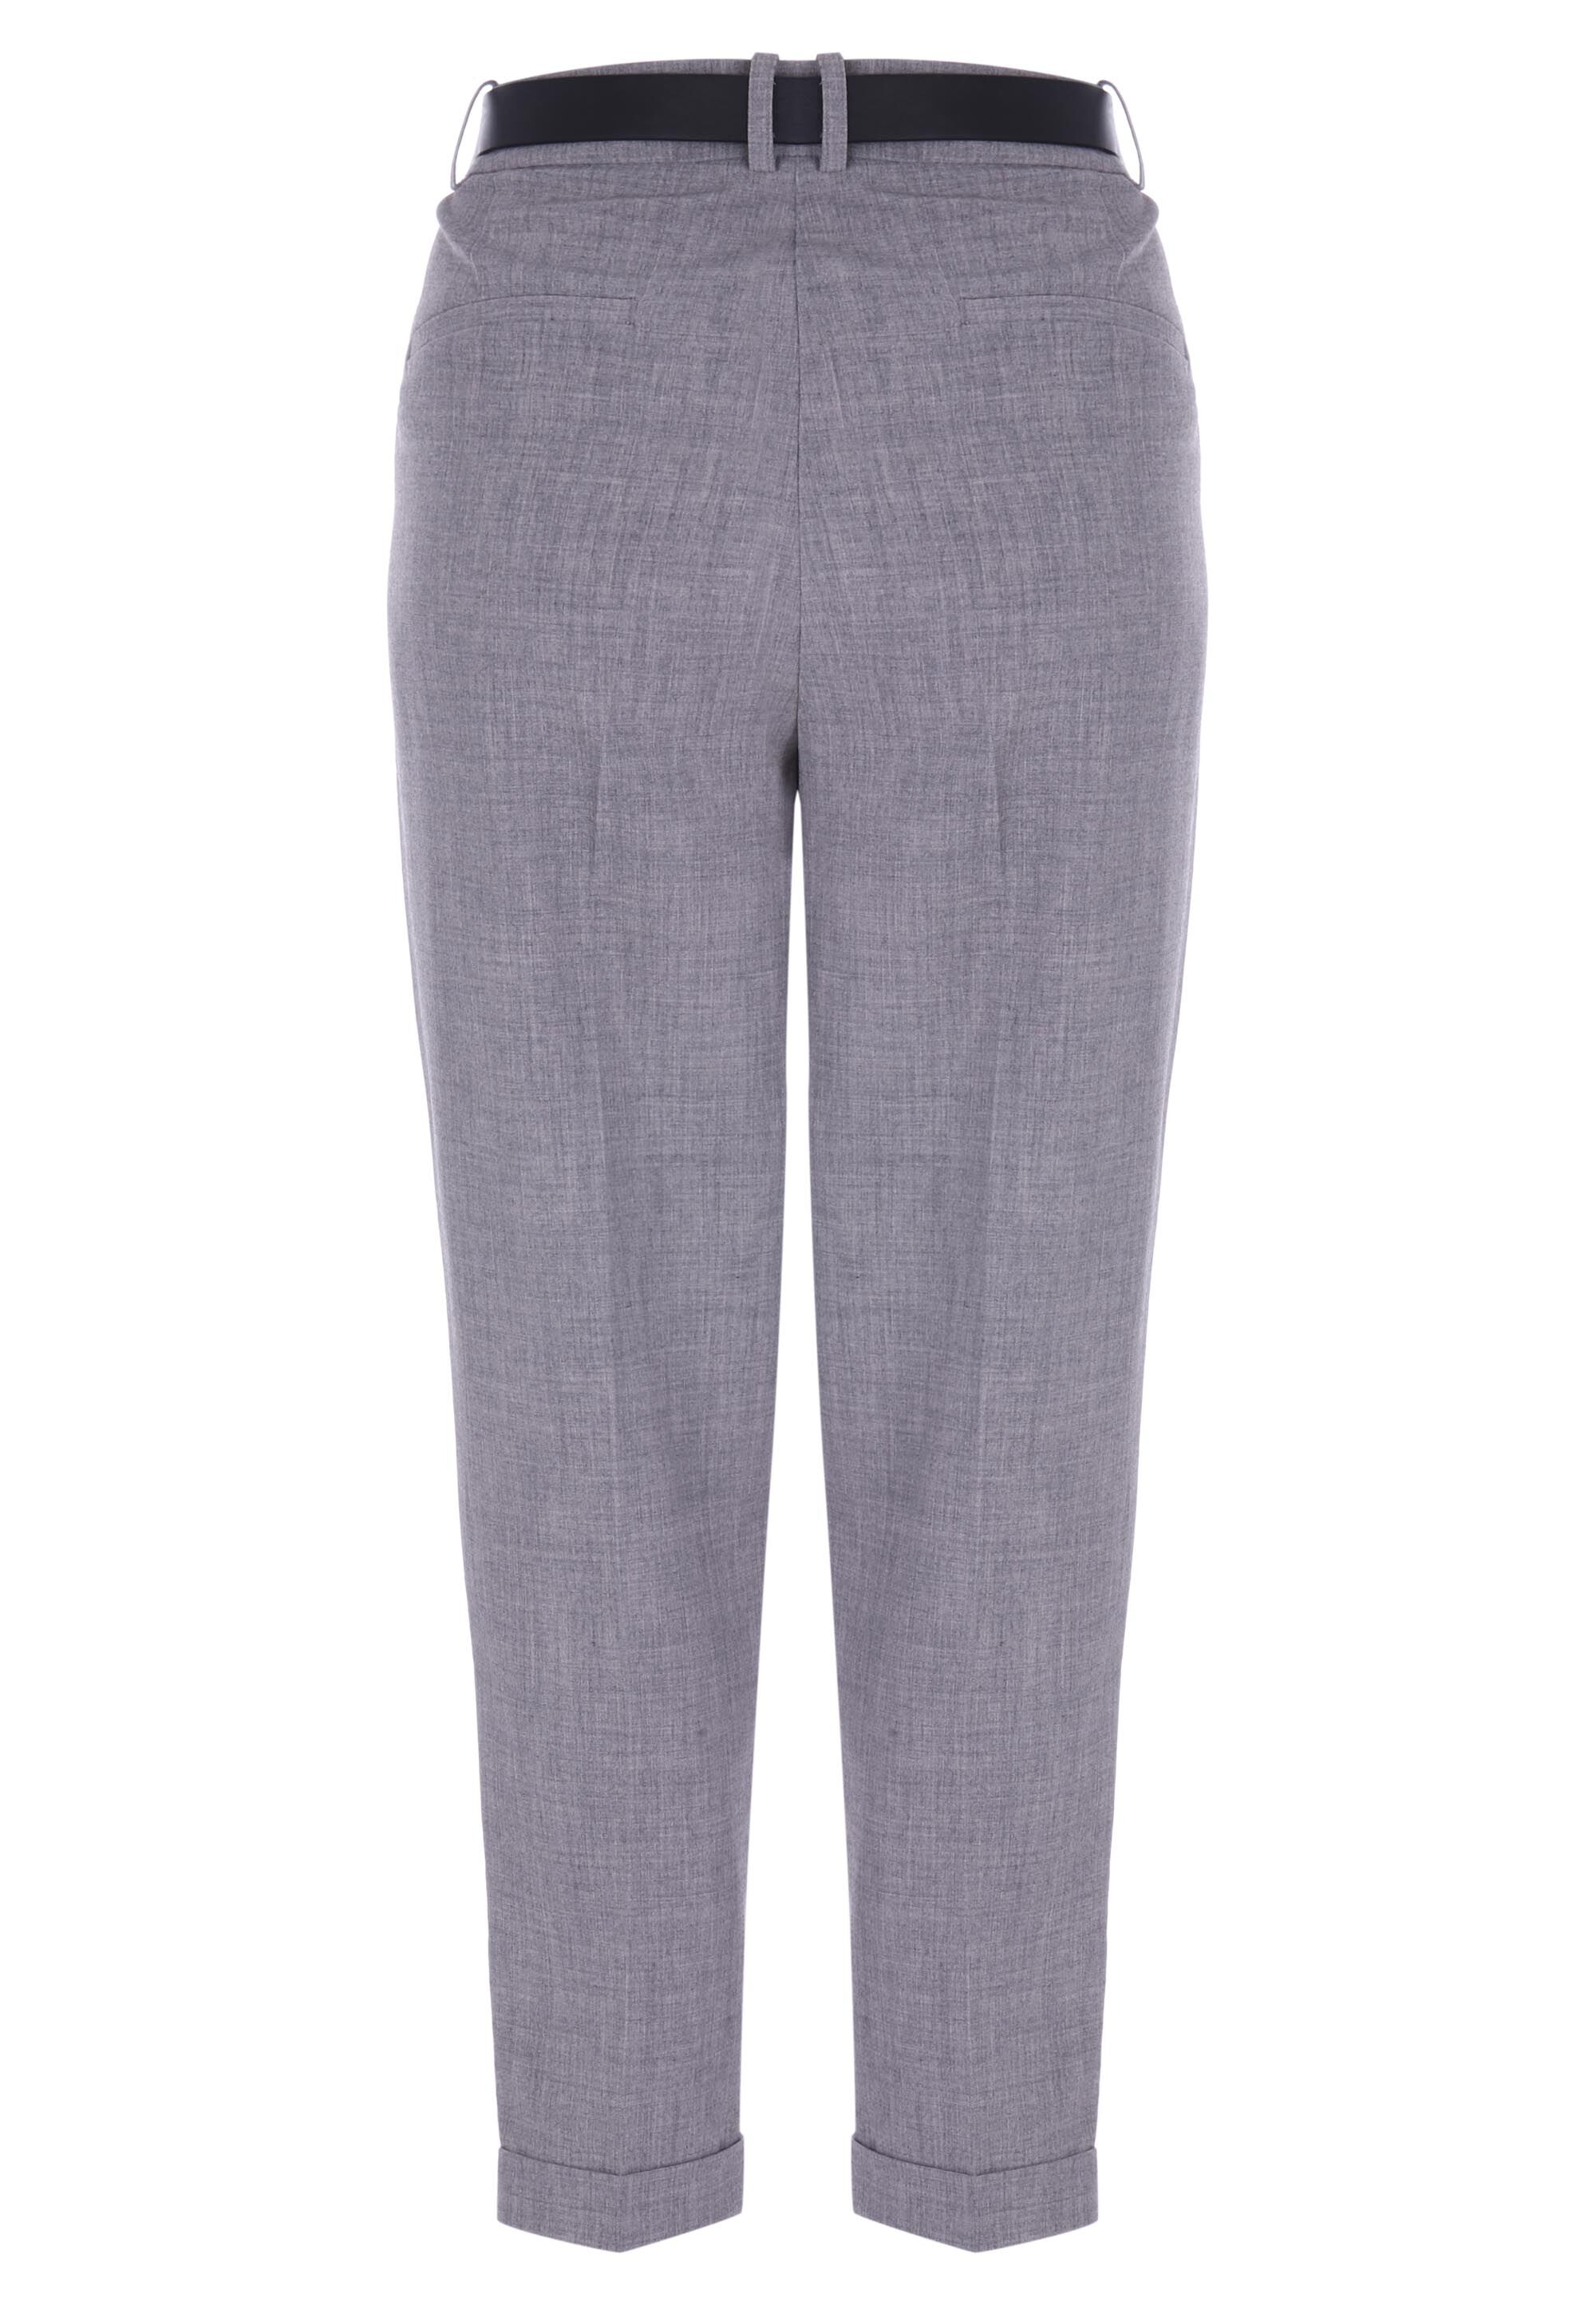 Womens Grey Textured Belted Trousers | Peacocks